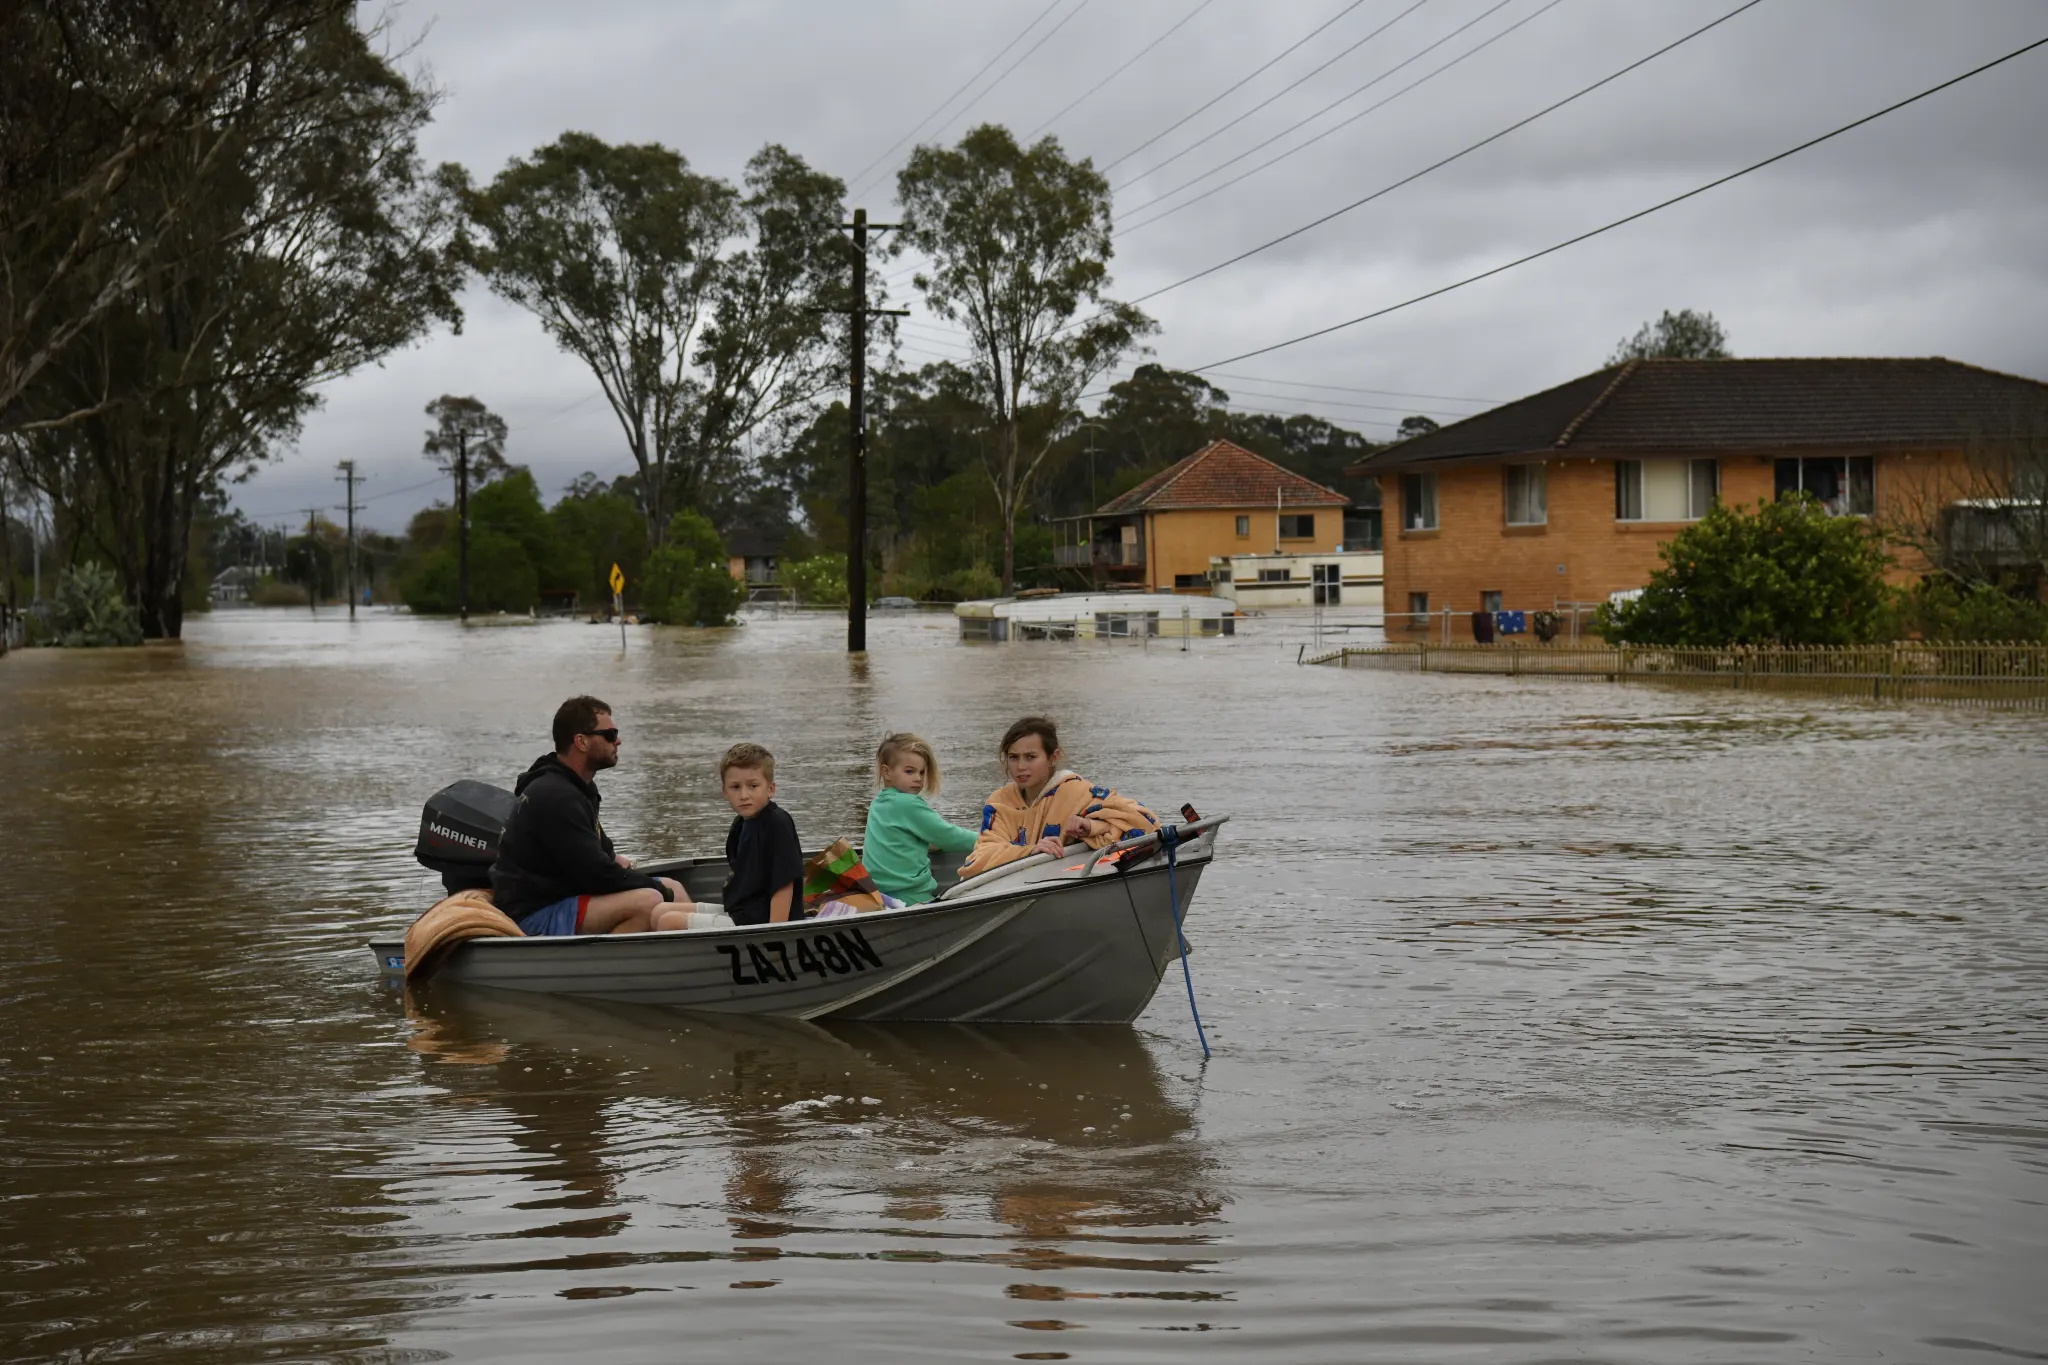 The Turner family children were rescued from the second storey of their Shanes Park home in north-west Sydney on 5 July 2022, after the fourth flood in less than 18 months. Photo: Dean Sewell / The Sydney Morning Herald